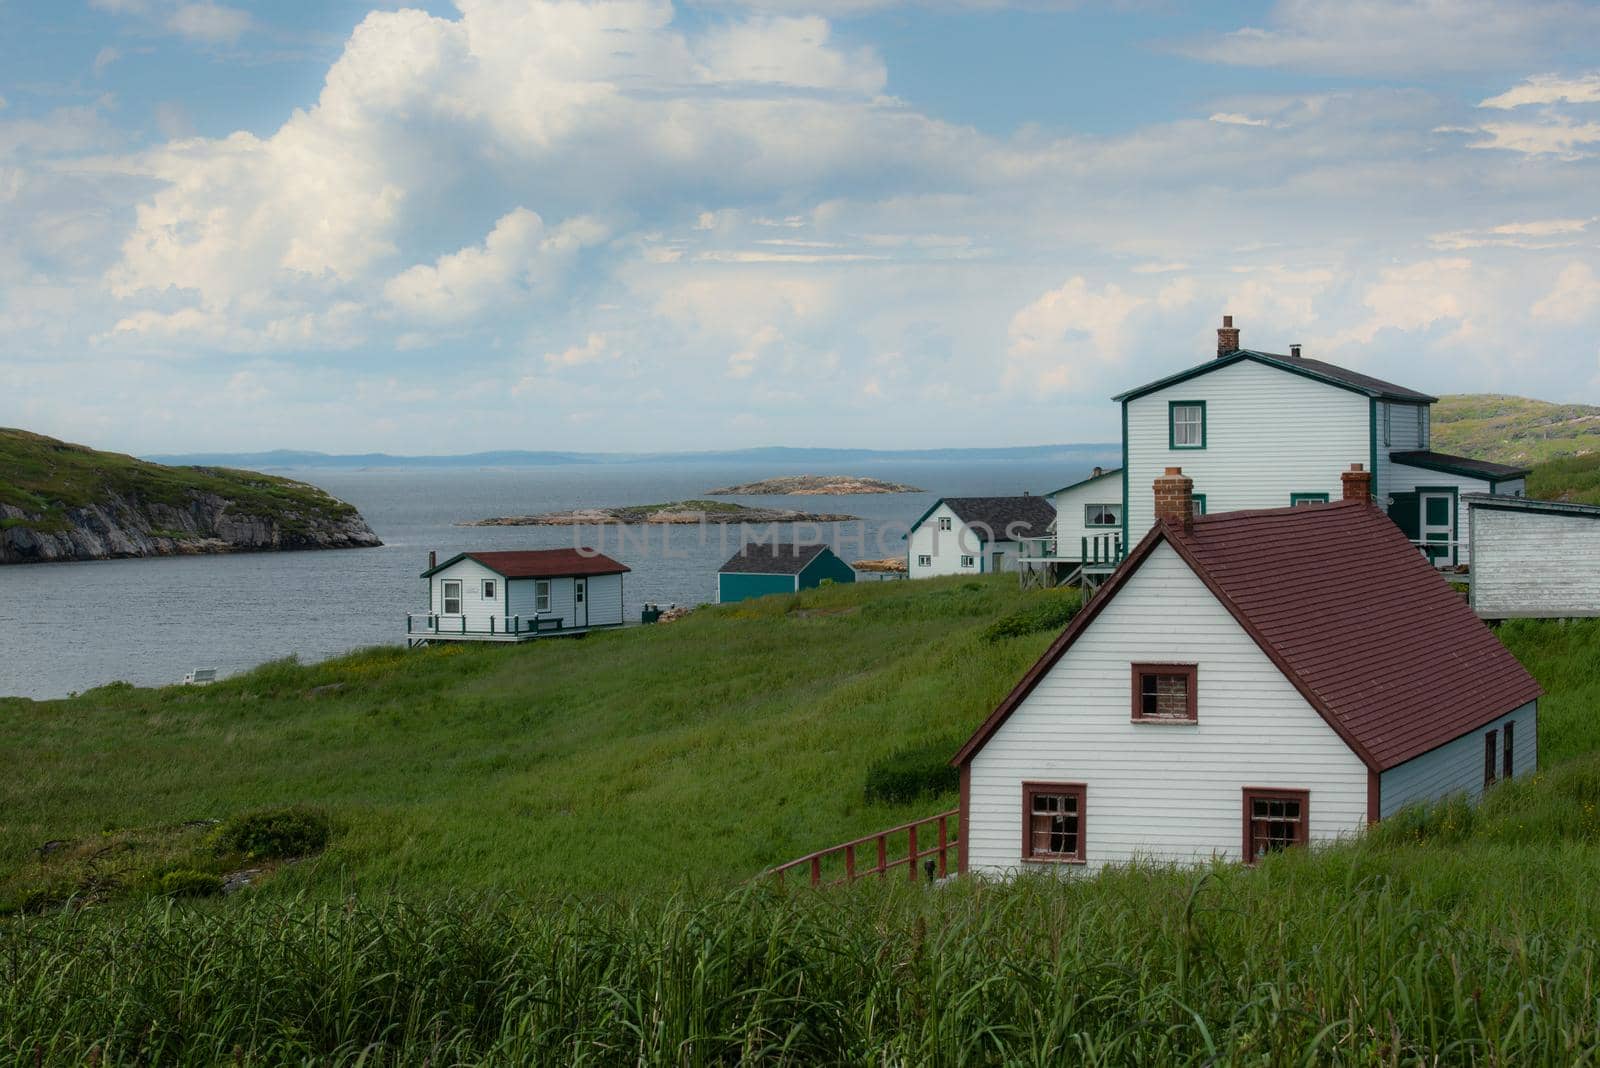 Battle Harbor overlooks the Sea in Labrador by lisaldw